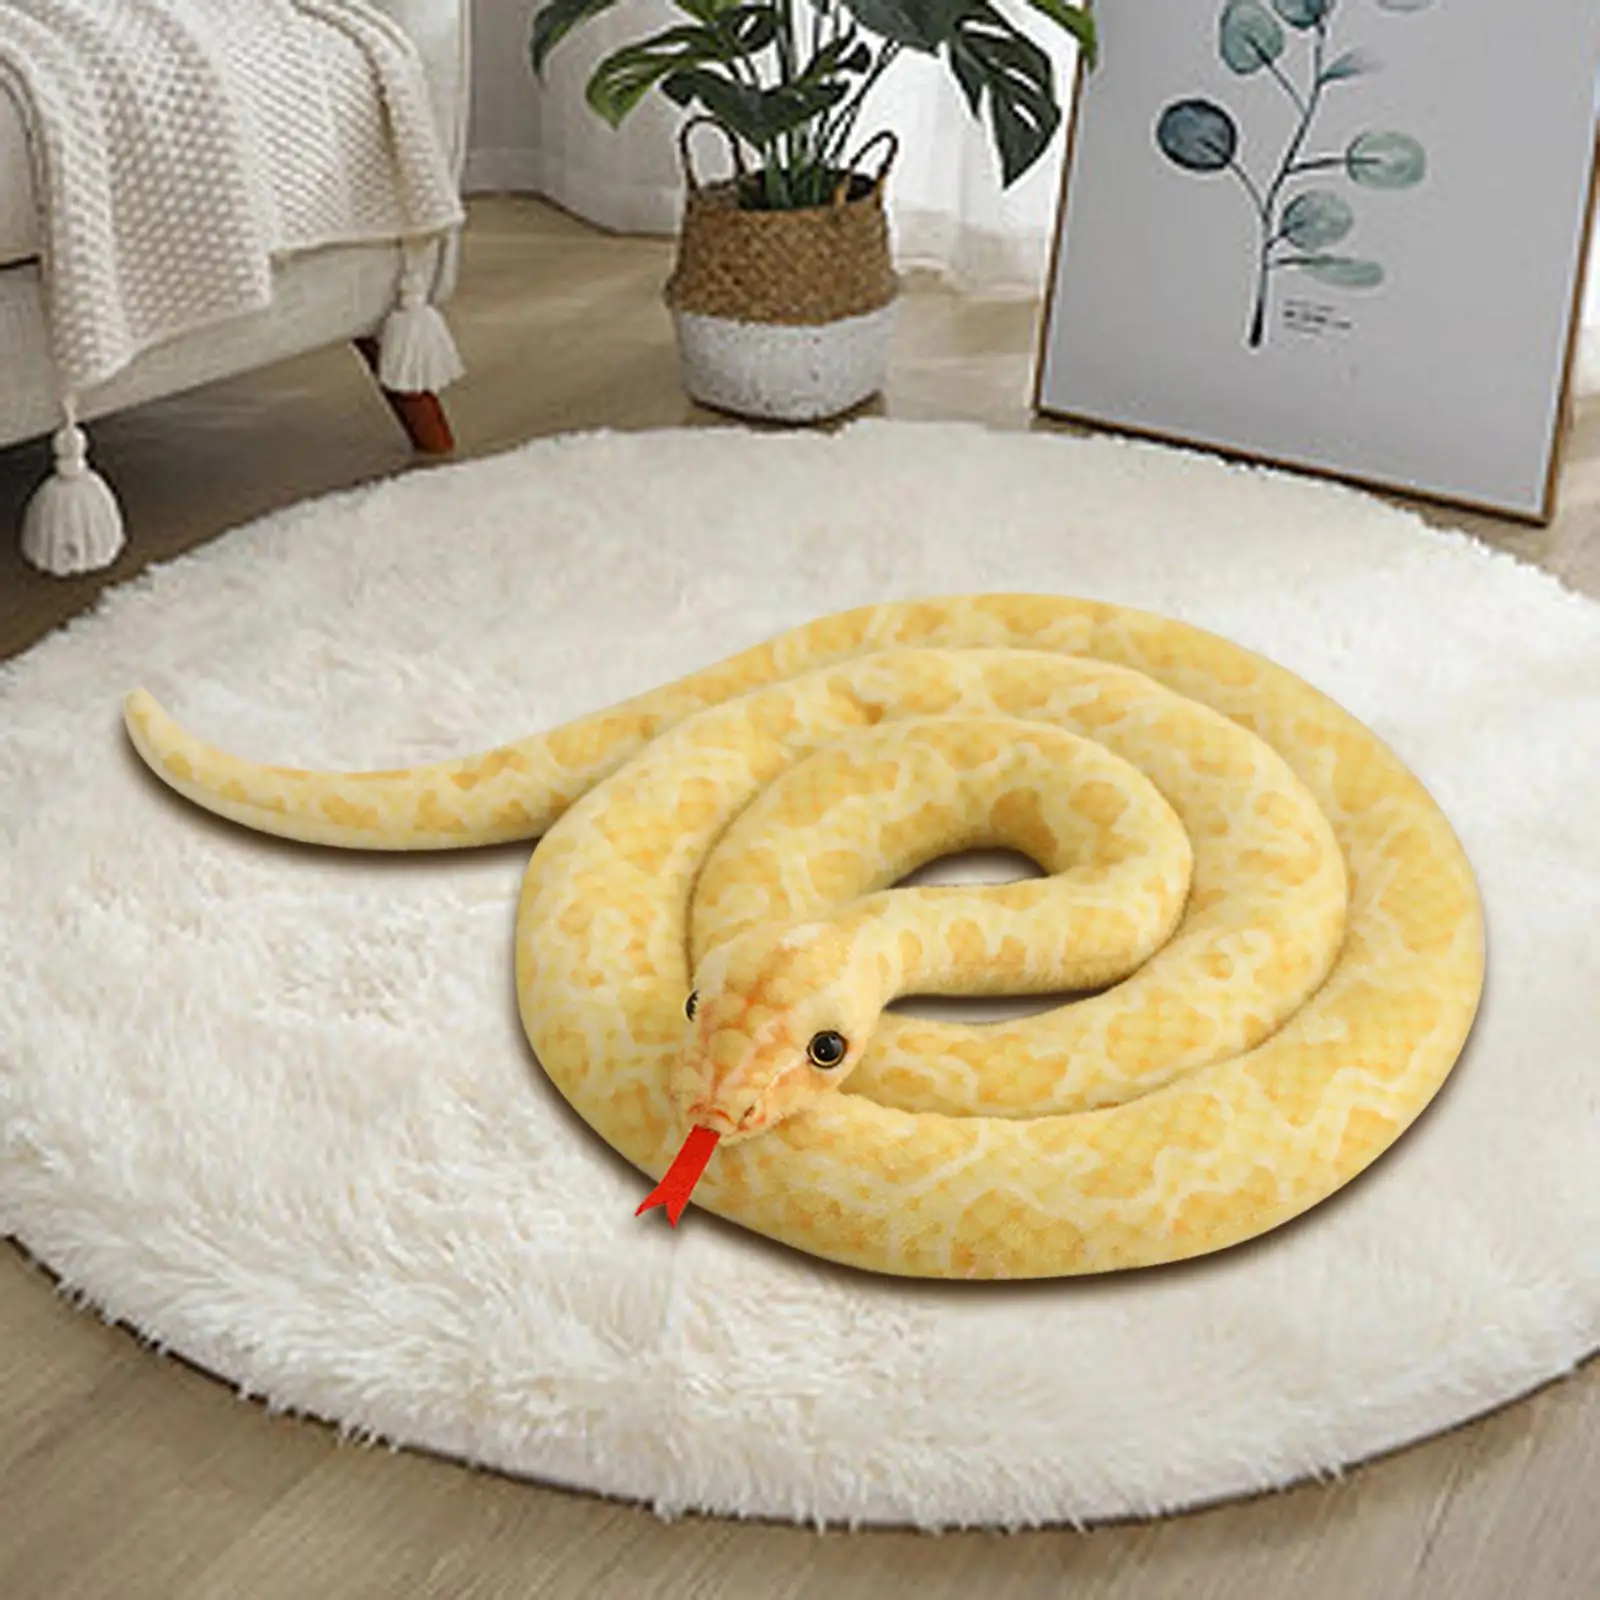 Simulation Snake Toy Long Snake Halloween Scare Props with Red Tongues Stuffed Animal Toy for Children Kids Boys Gifts